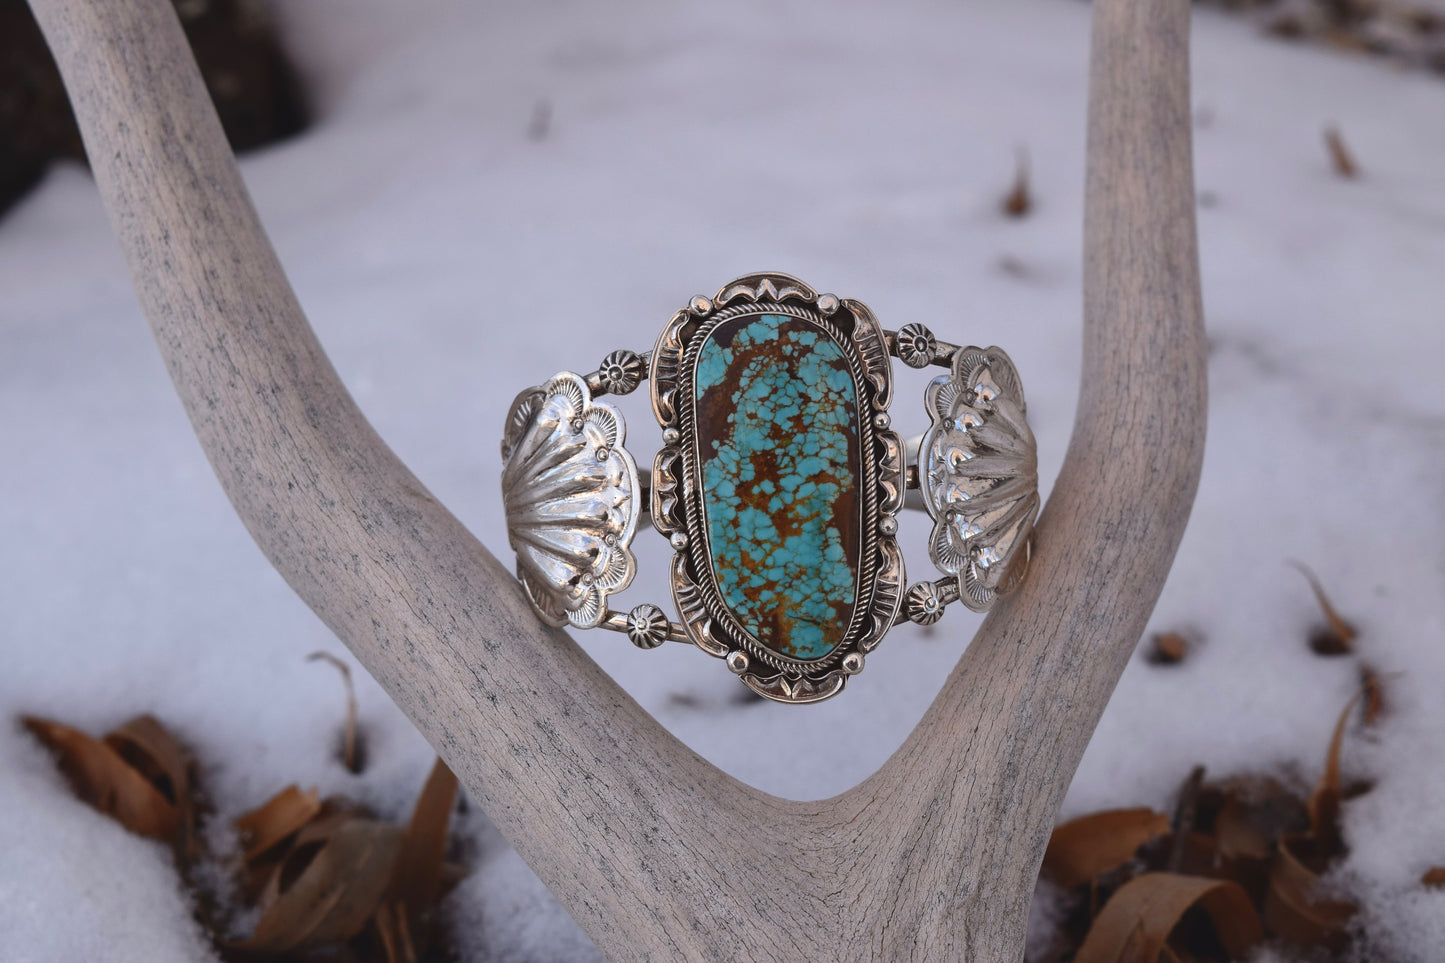 OVAL #8 TURQUOISE BRACELET FROM THE RODGERS COLLECTION